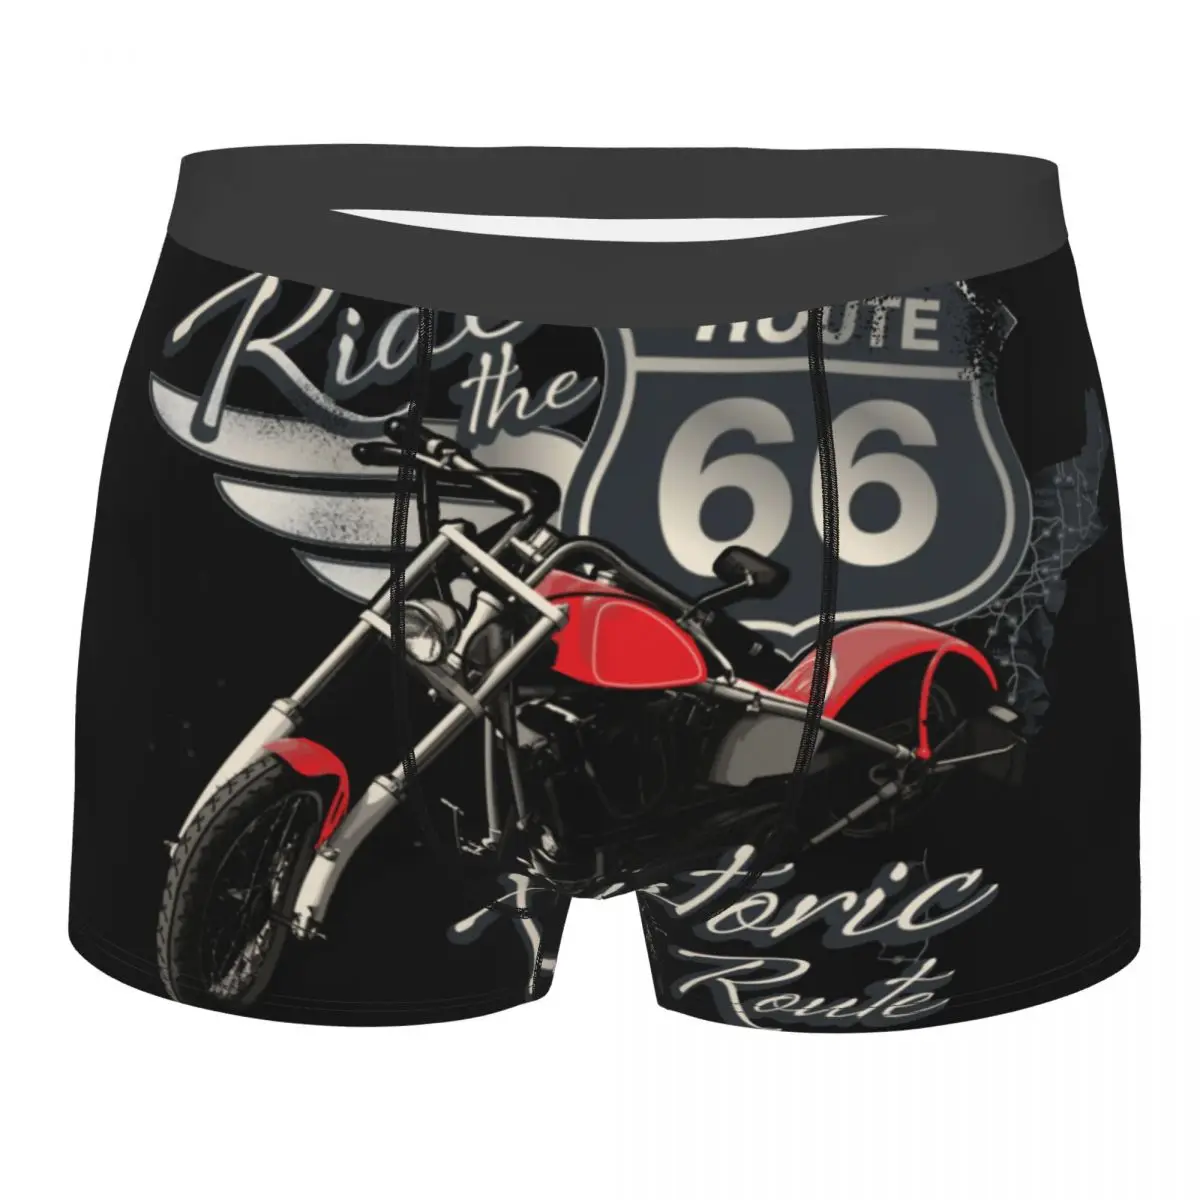 

Man Boxer Briefs Shorts Panties Travel Motorcycle Ride The Historic Route 66 Underwear Mother Road American Homme Underpants